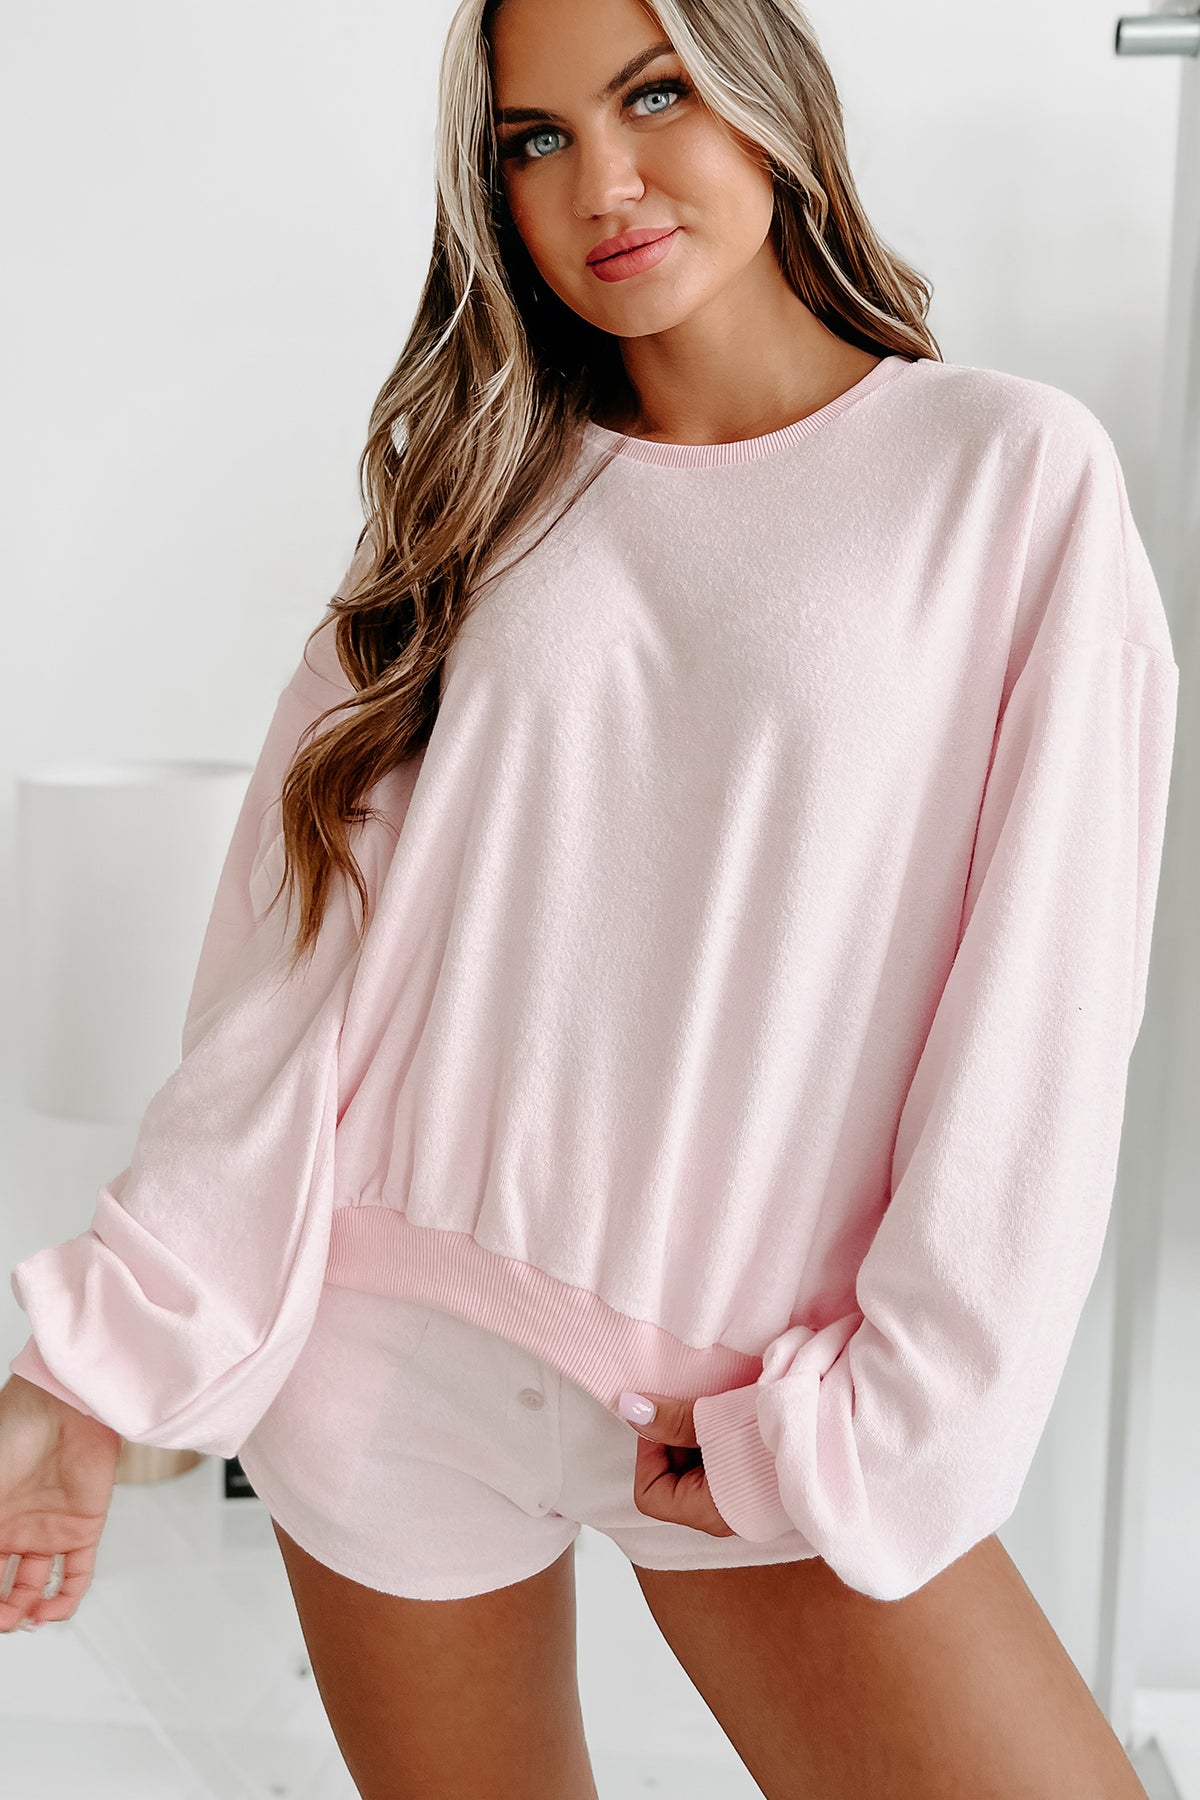 Cozy State Terry Knit Sweatshirt & Shorts Set (Light Pink) Sweet Generis  Get the Look for lower cost